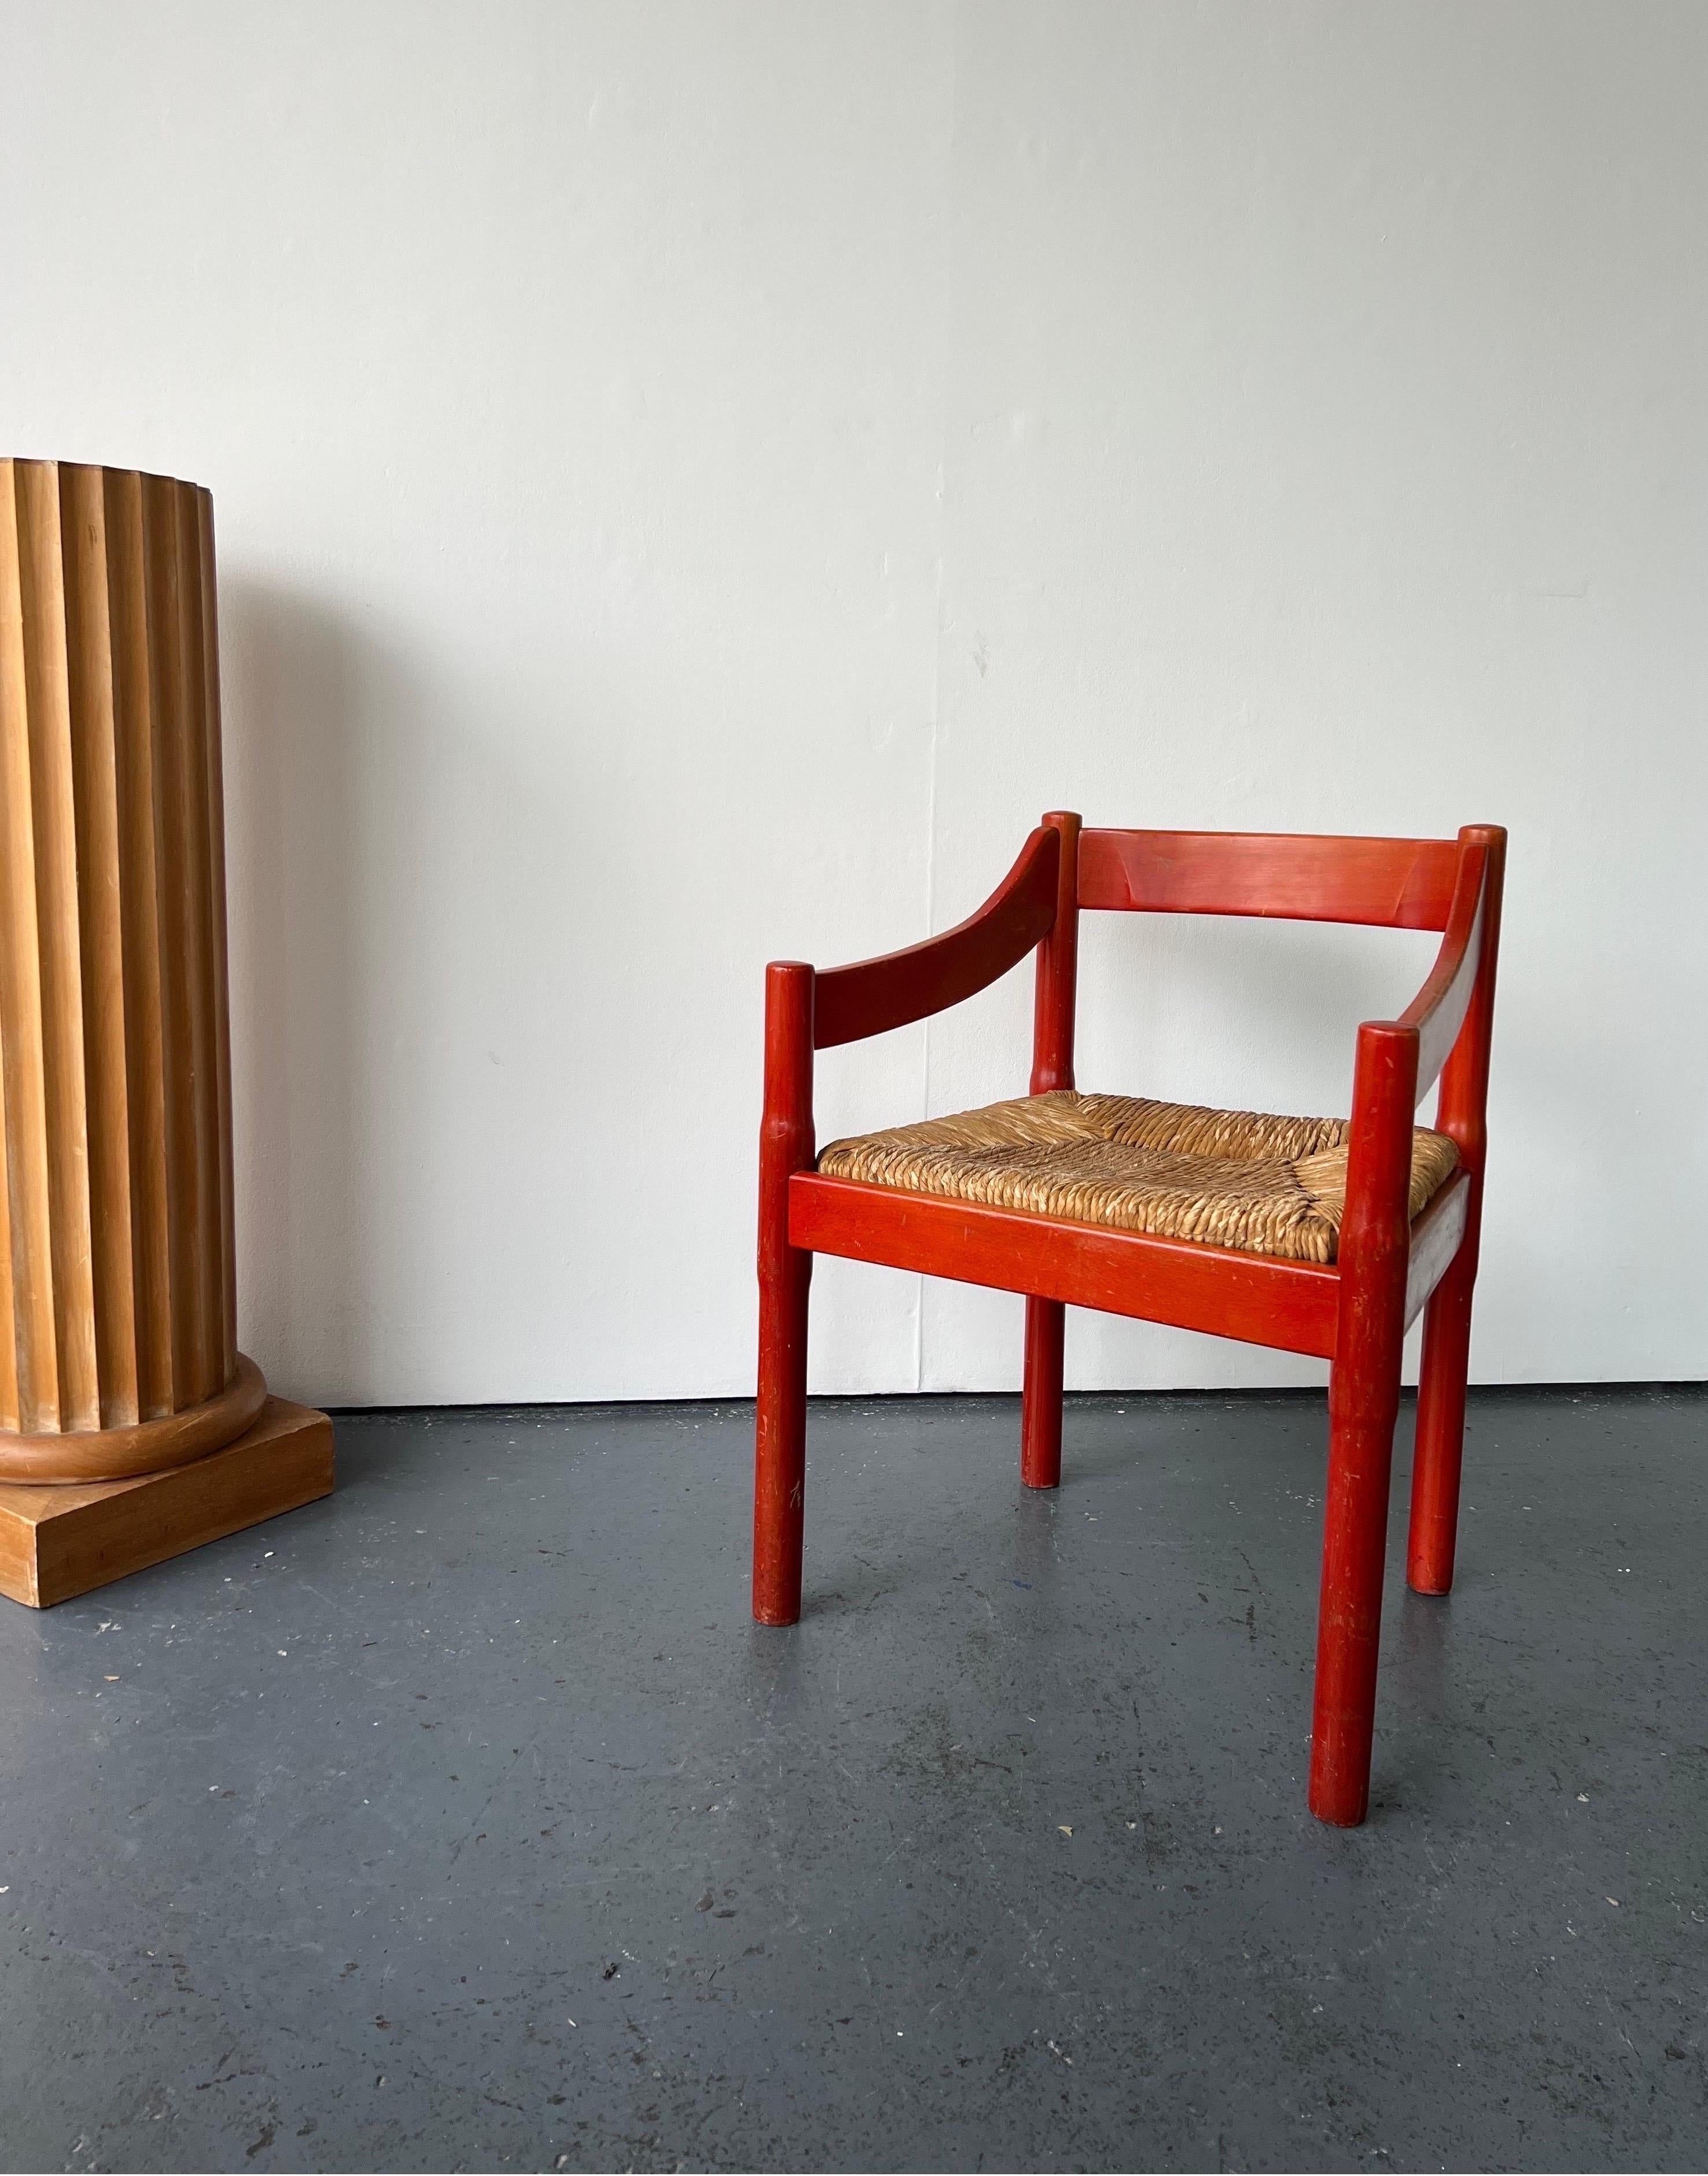 Single Carimate carver chair by designer and architect Vico Magistretti.

Charming original red-stained solid beech Carimate chair designed by architect and designer Vico Magistretti. The chair has the original red stain from the 1960s, the red